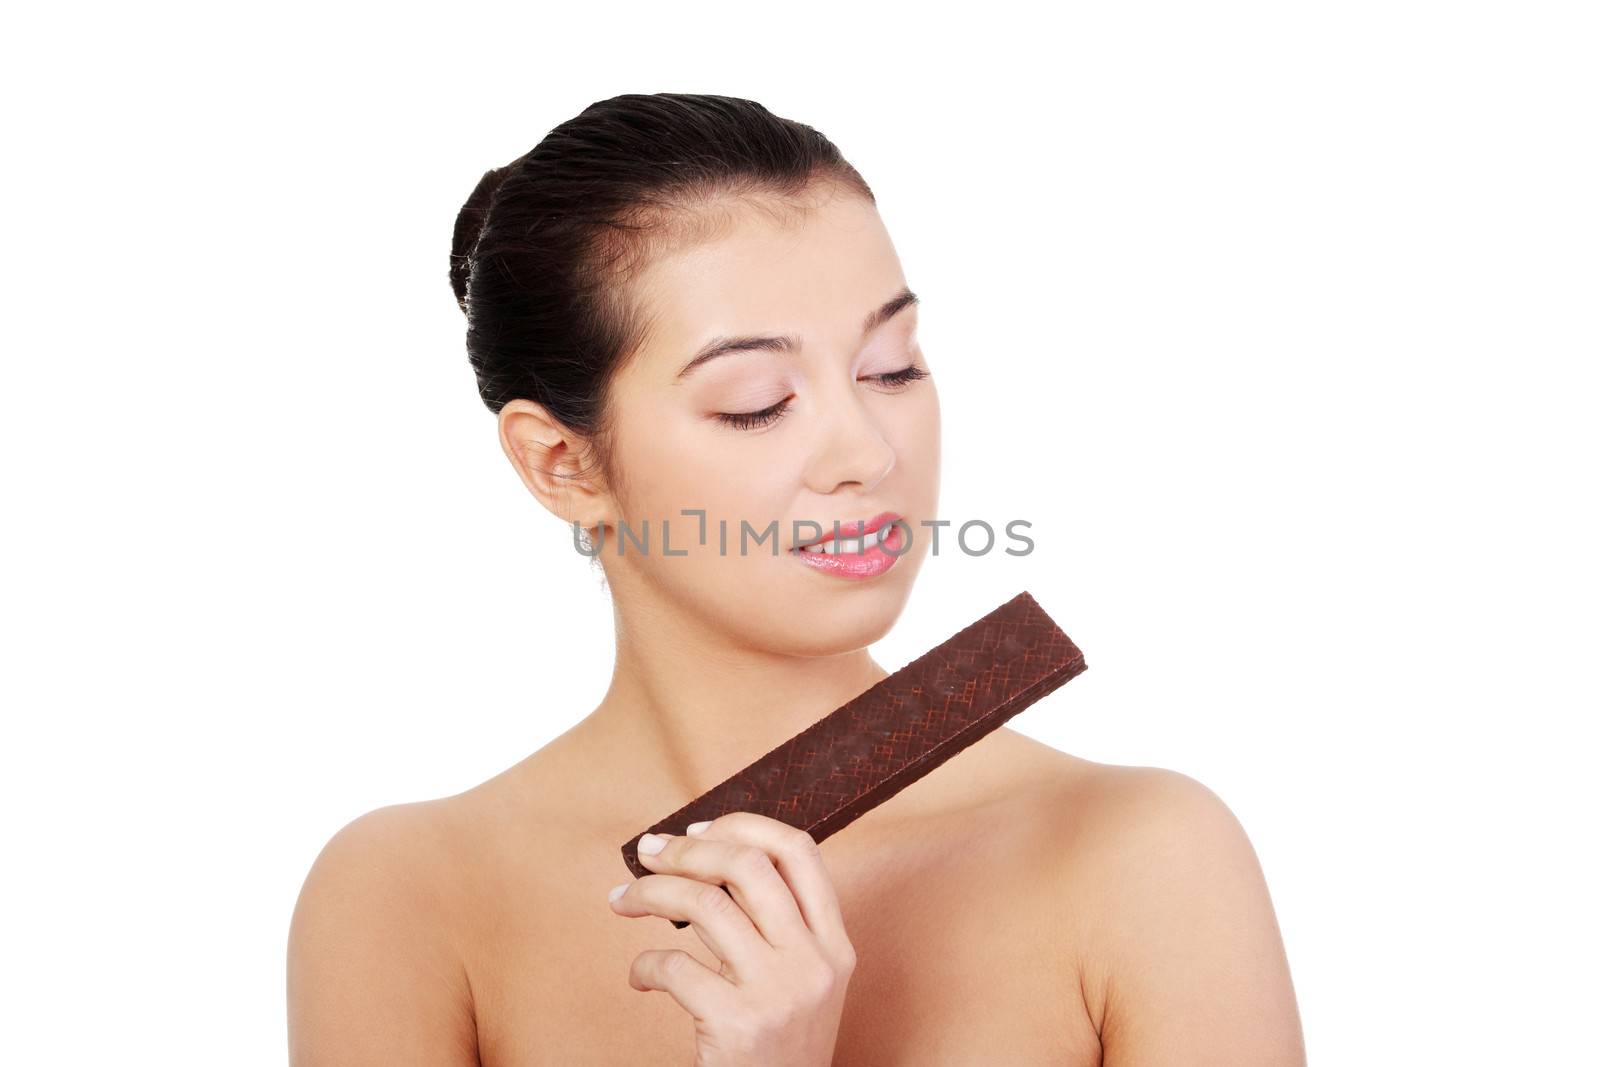 Pretty happy smiling woman eating chocolate waffle, isolated on white